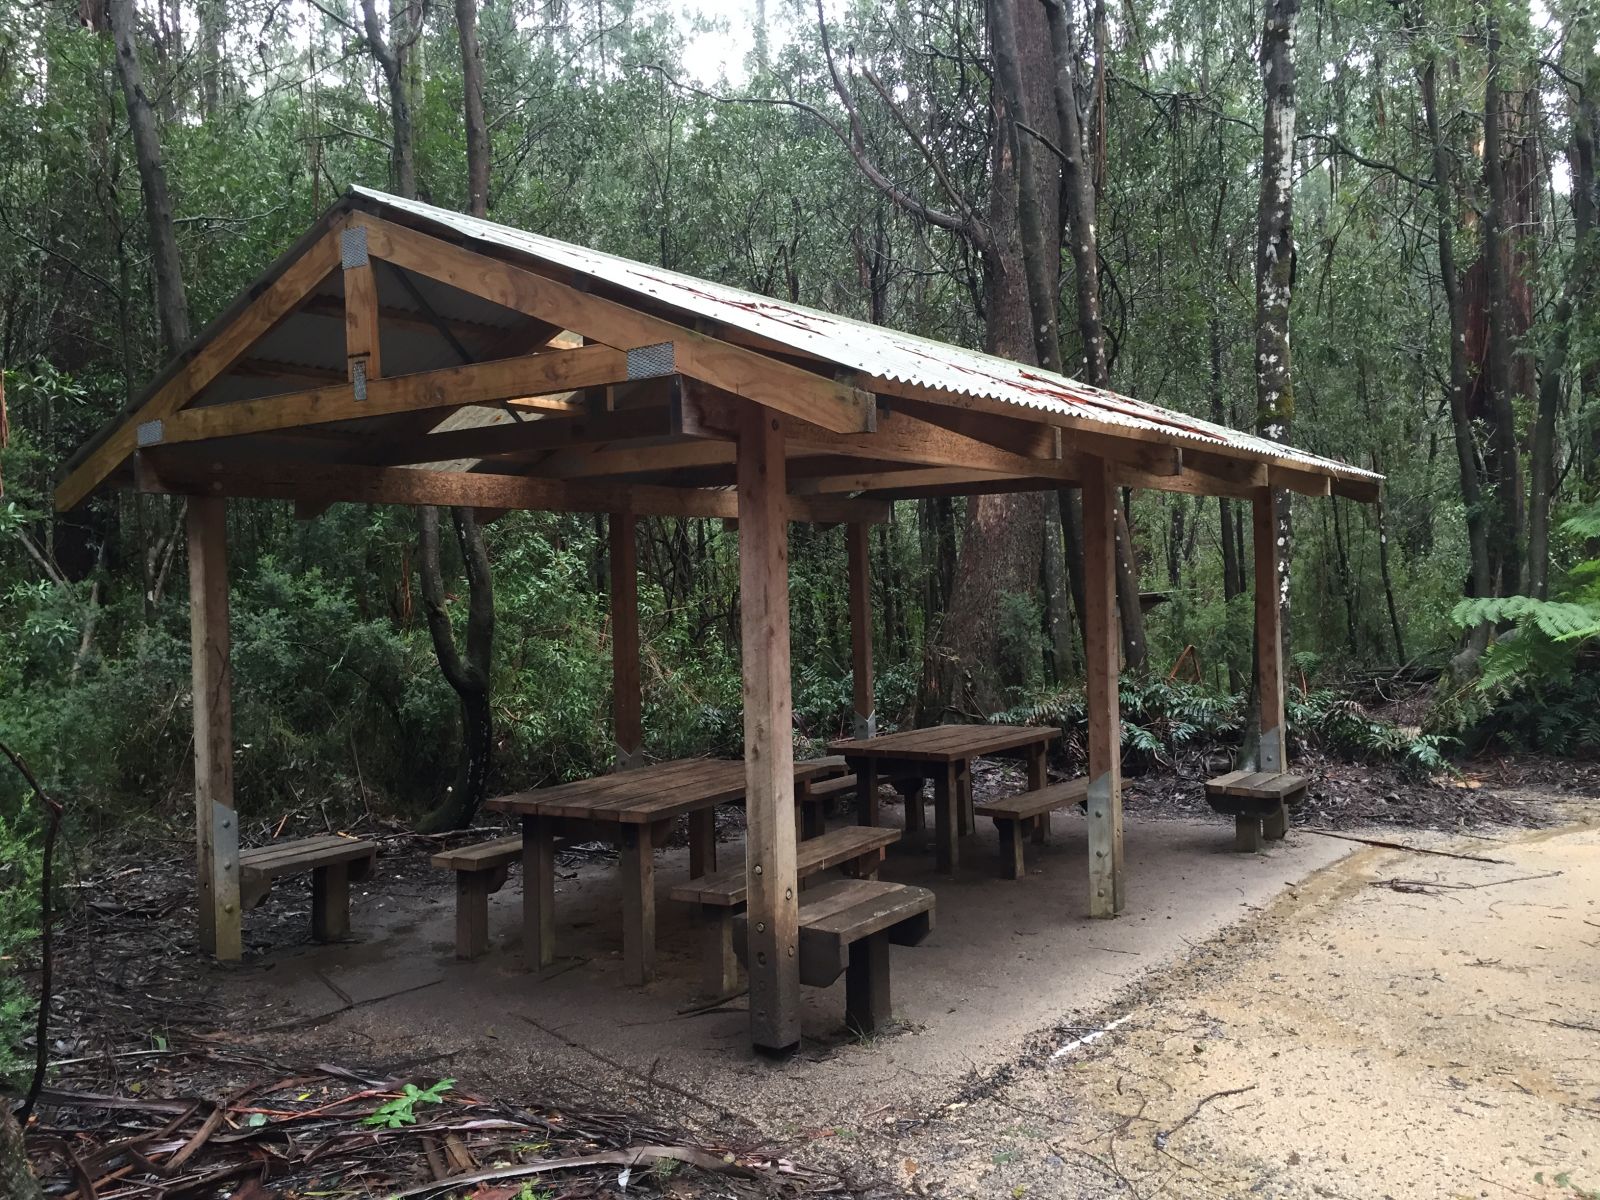 A picnic shelter covers two picnic tables